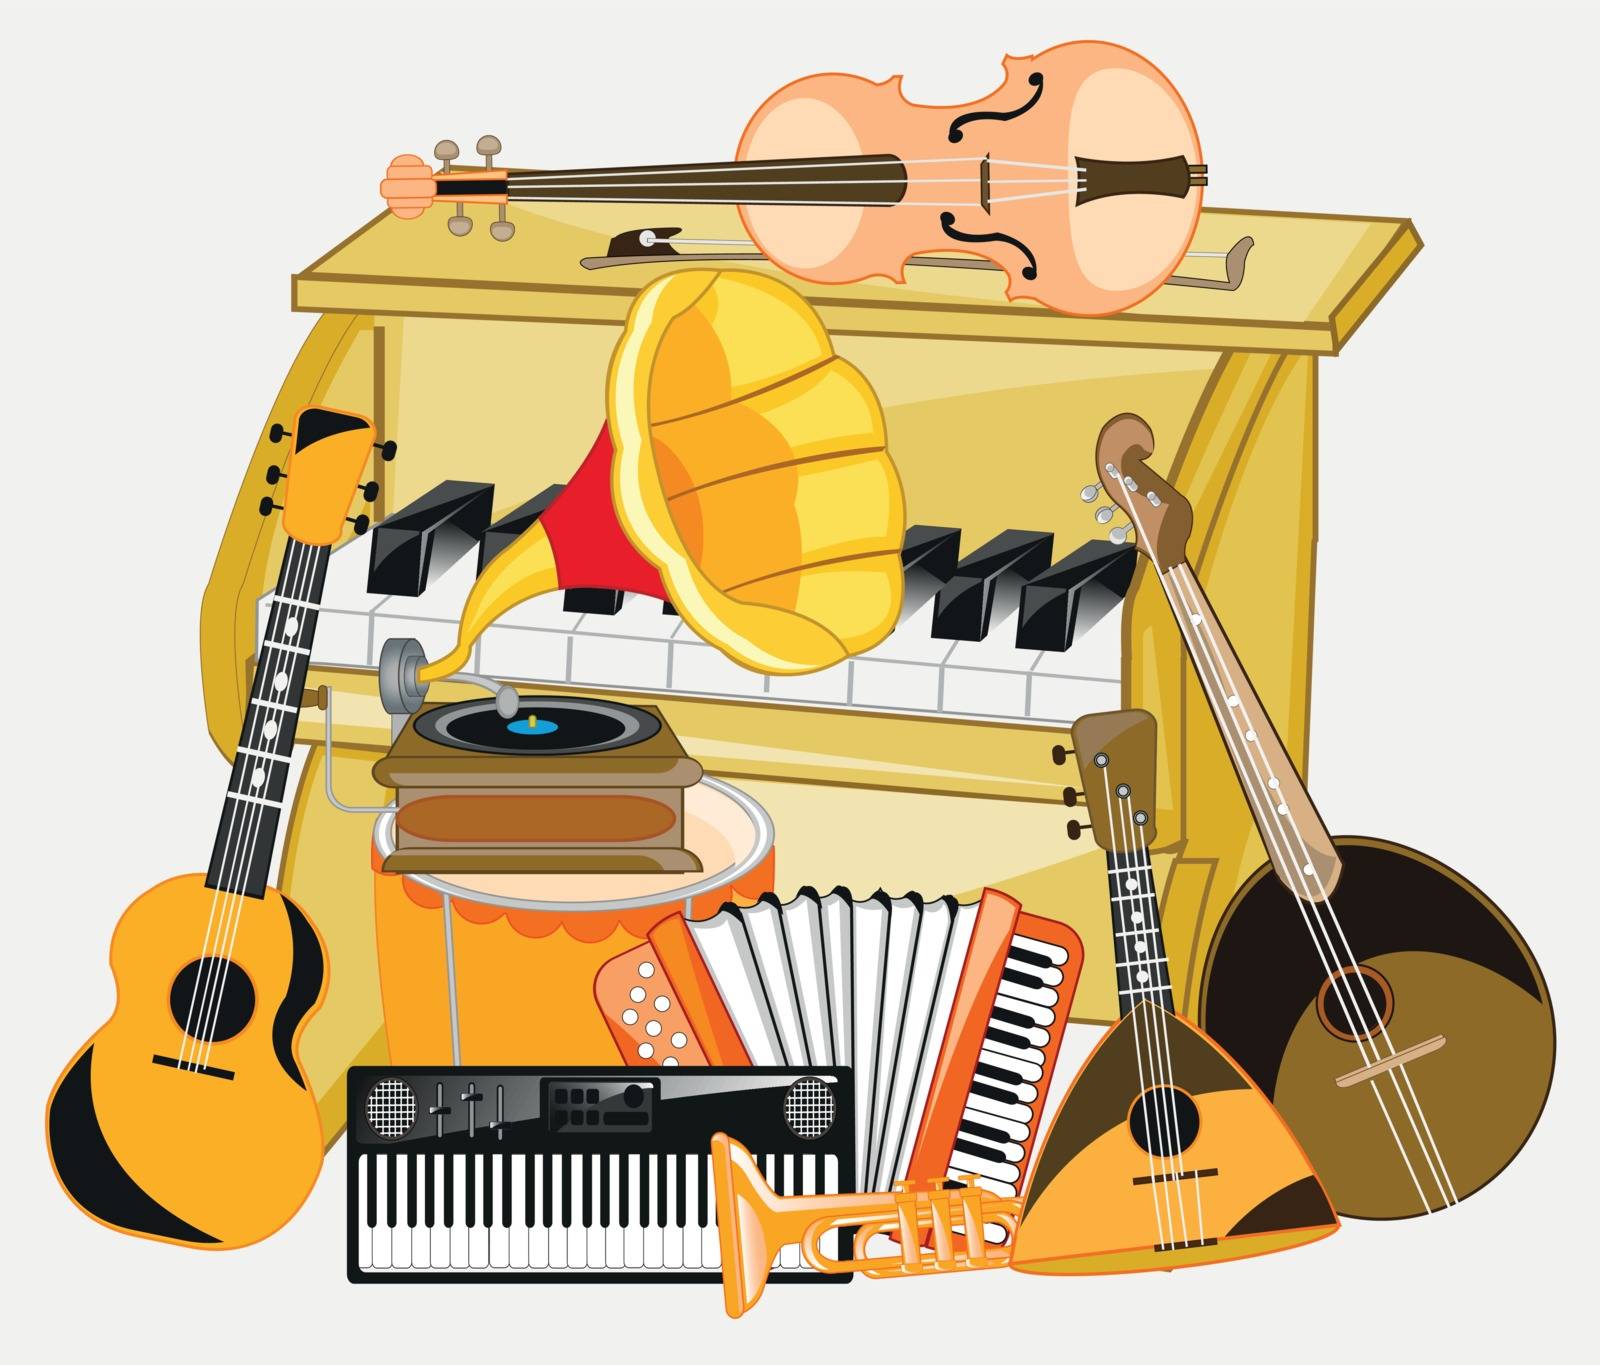 Much music instruments on white background is insulated